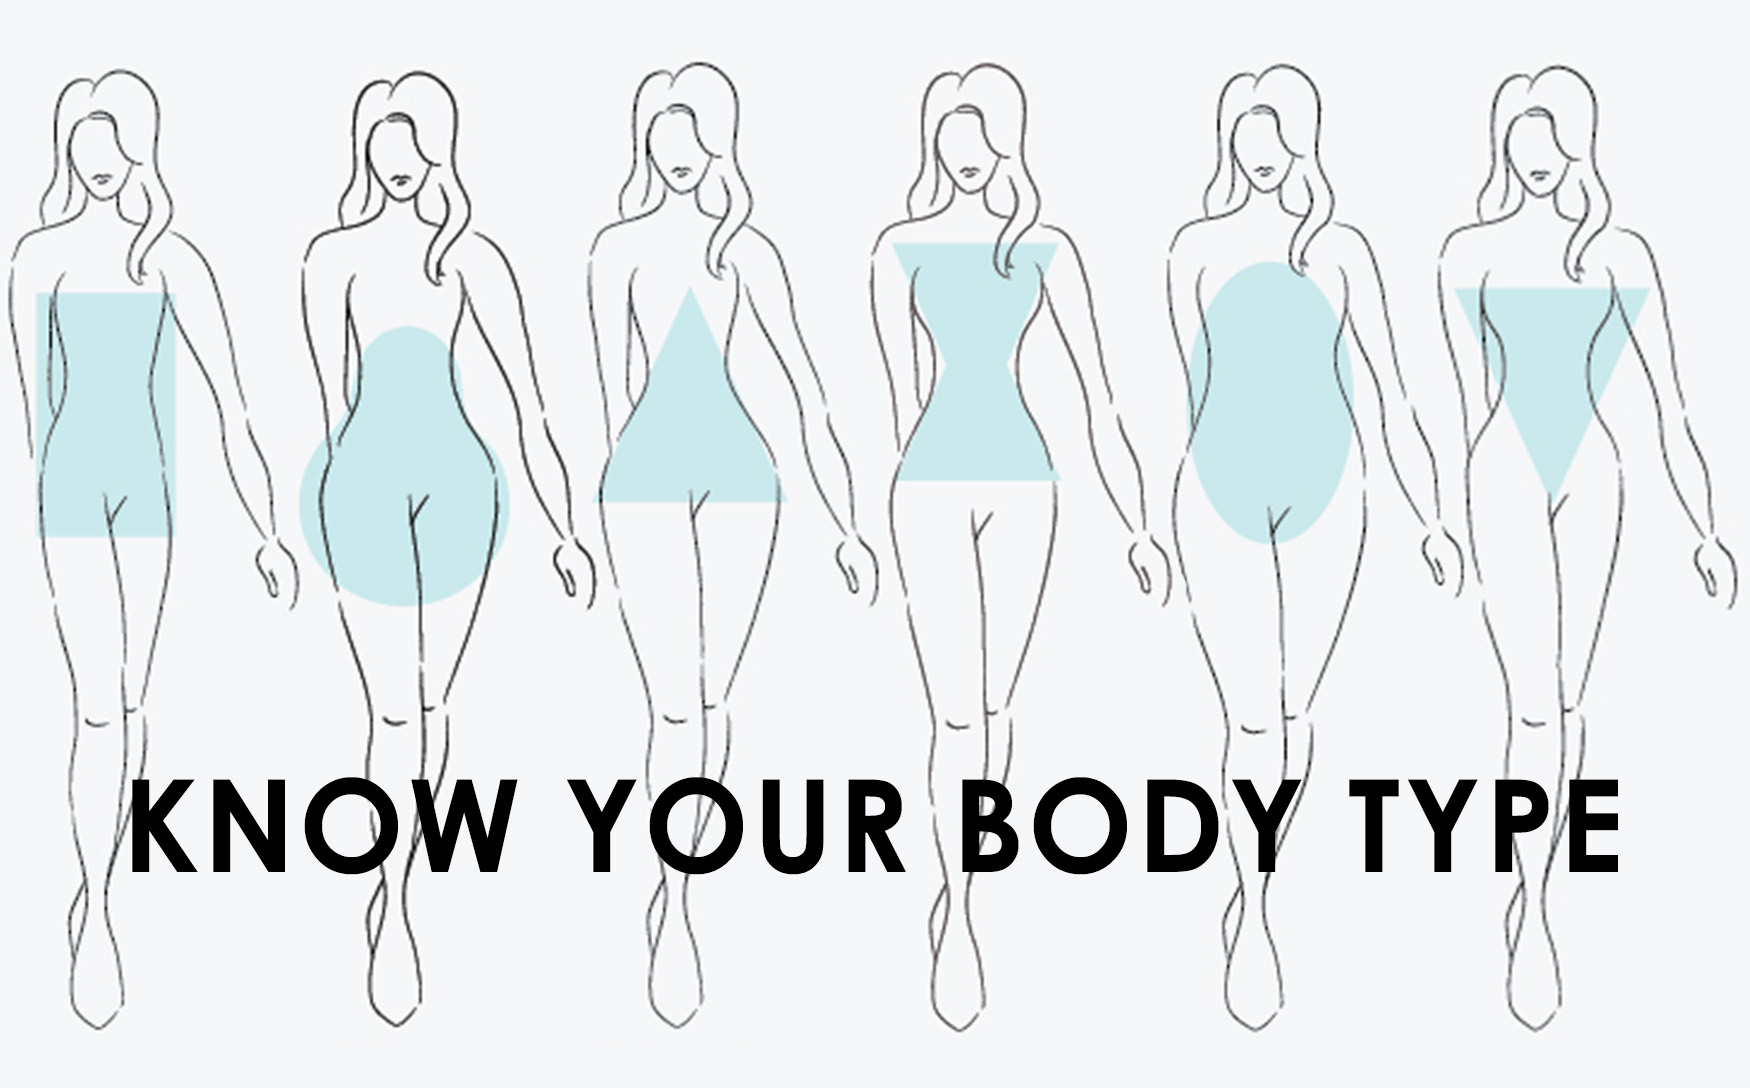 5 Reasons Why You Need to Understand Your Unique Body Type